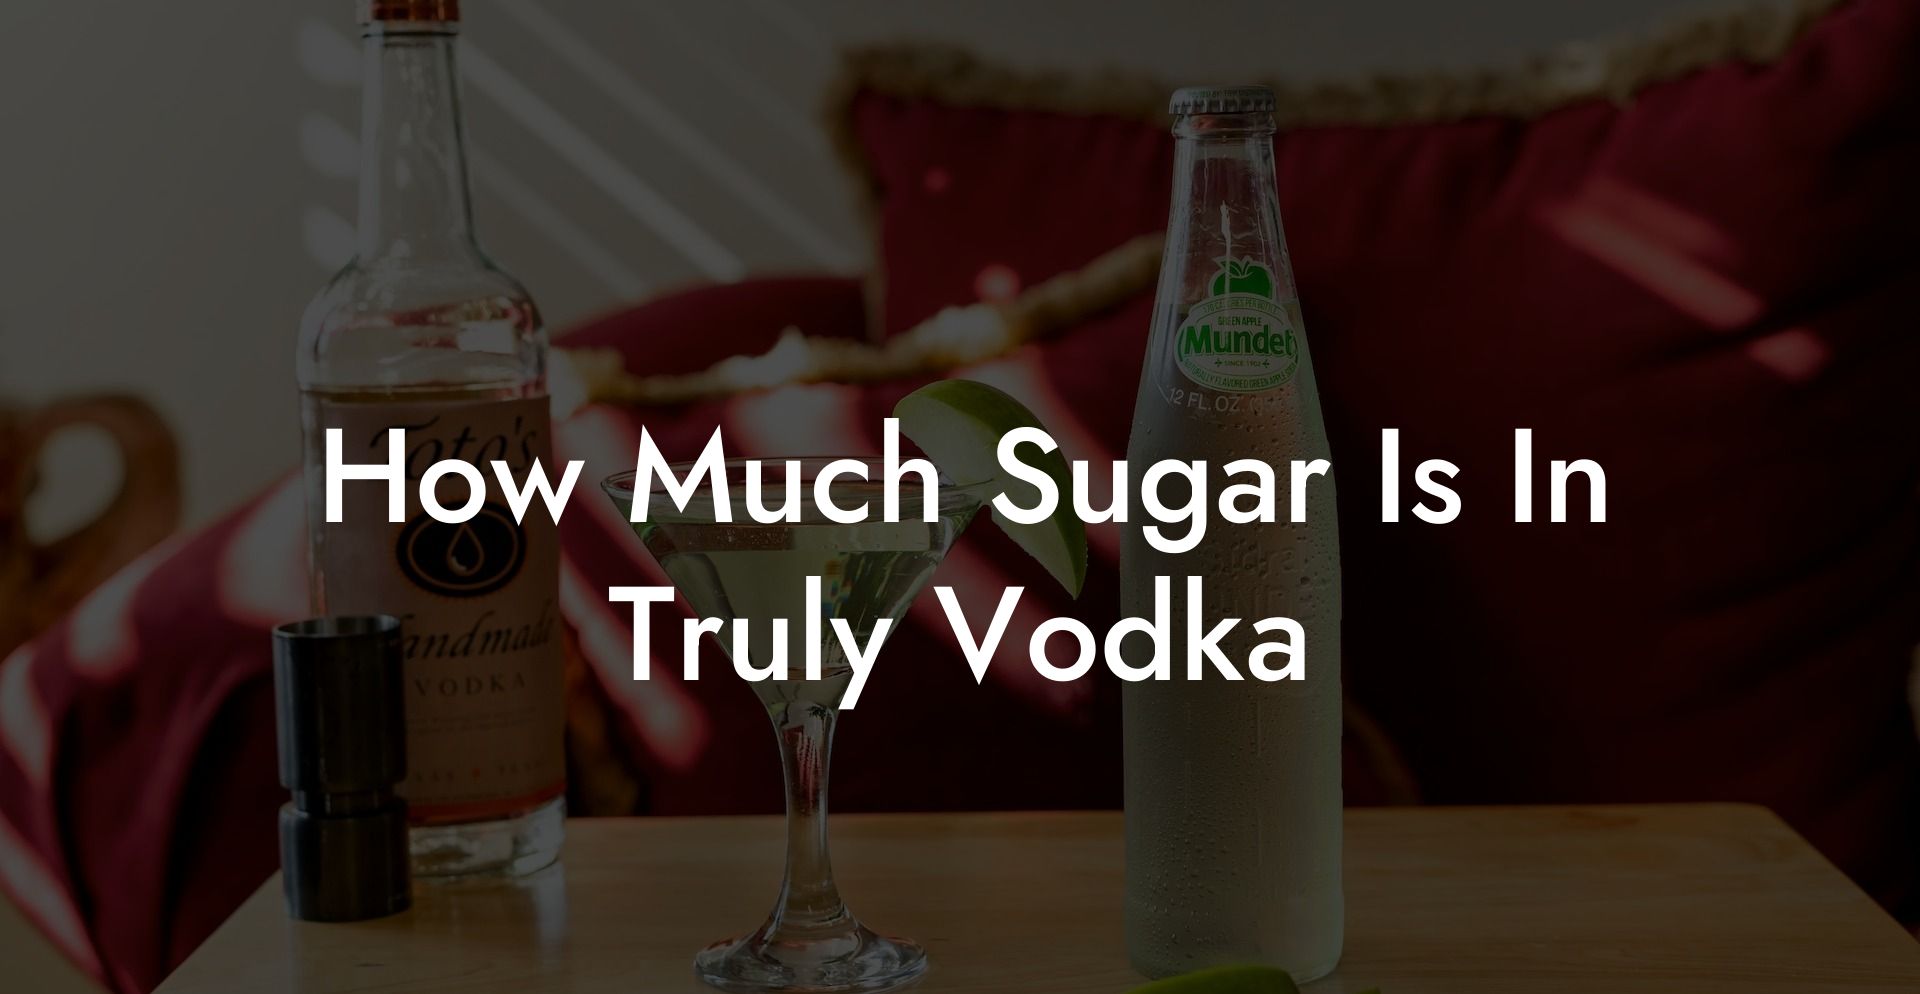 How Much Sugar Is In Truly Vodka